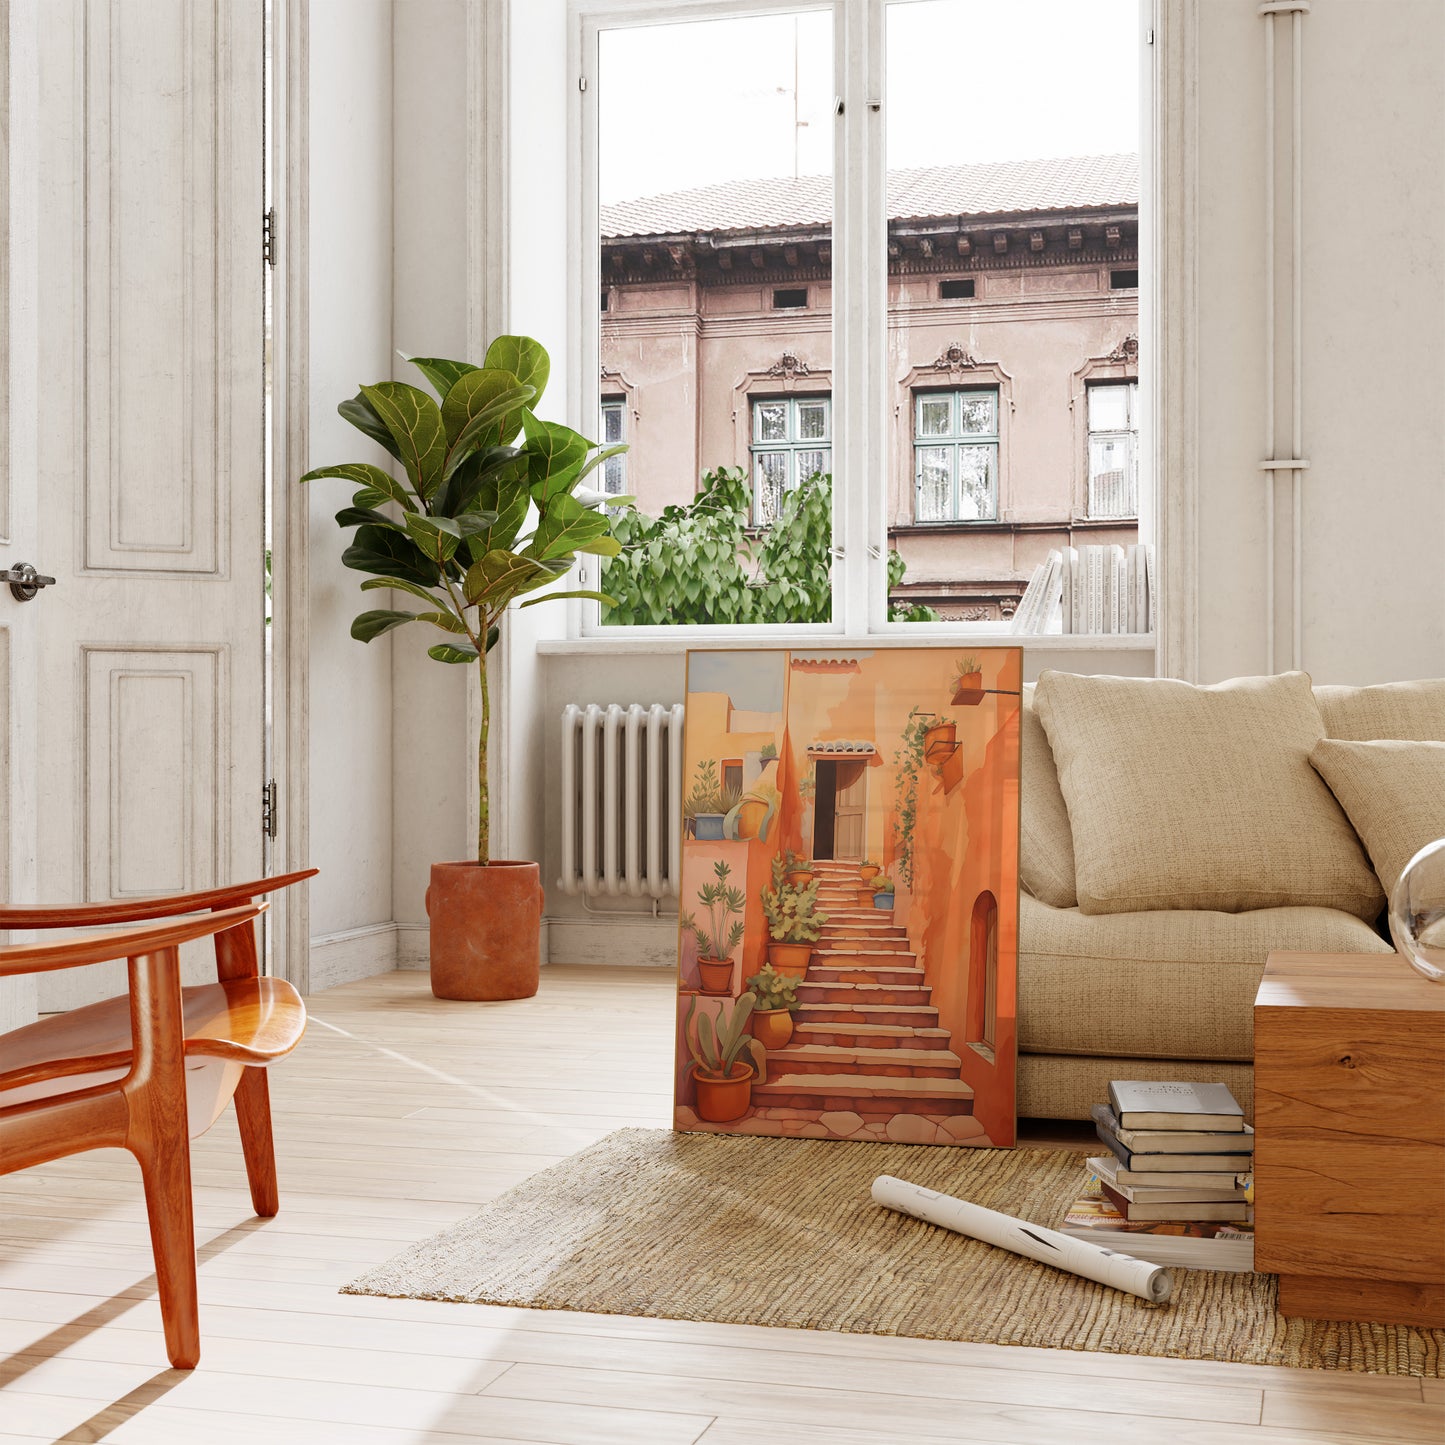 Bright living room with a comfortable couch, plants, and a canvas painting leaning against the wall.